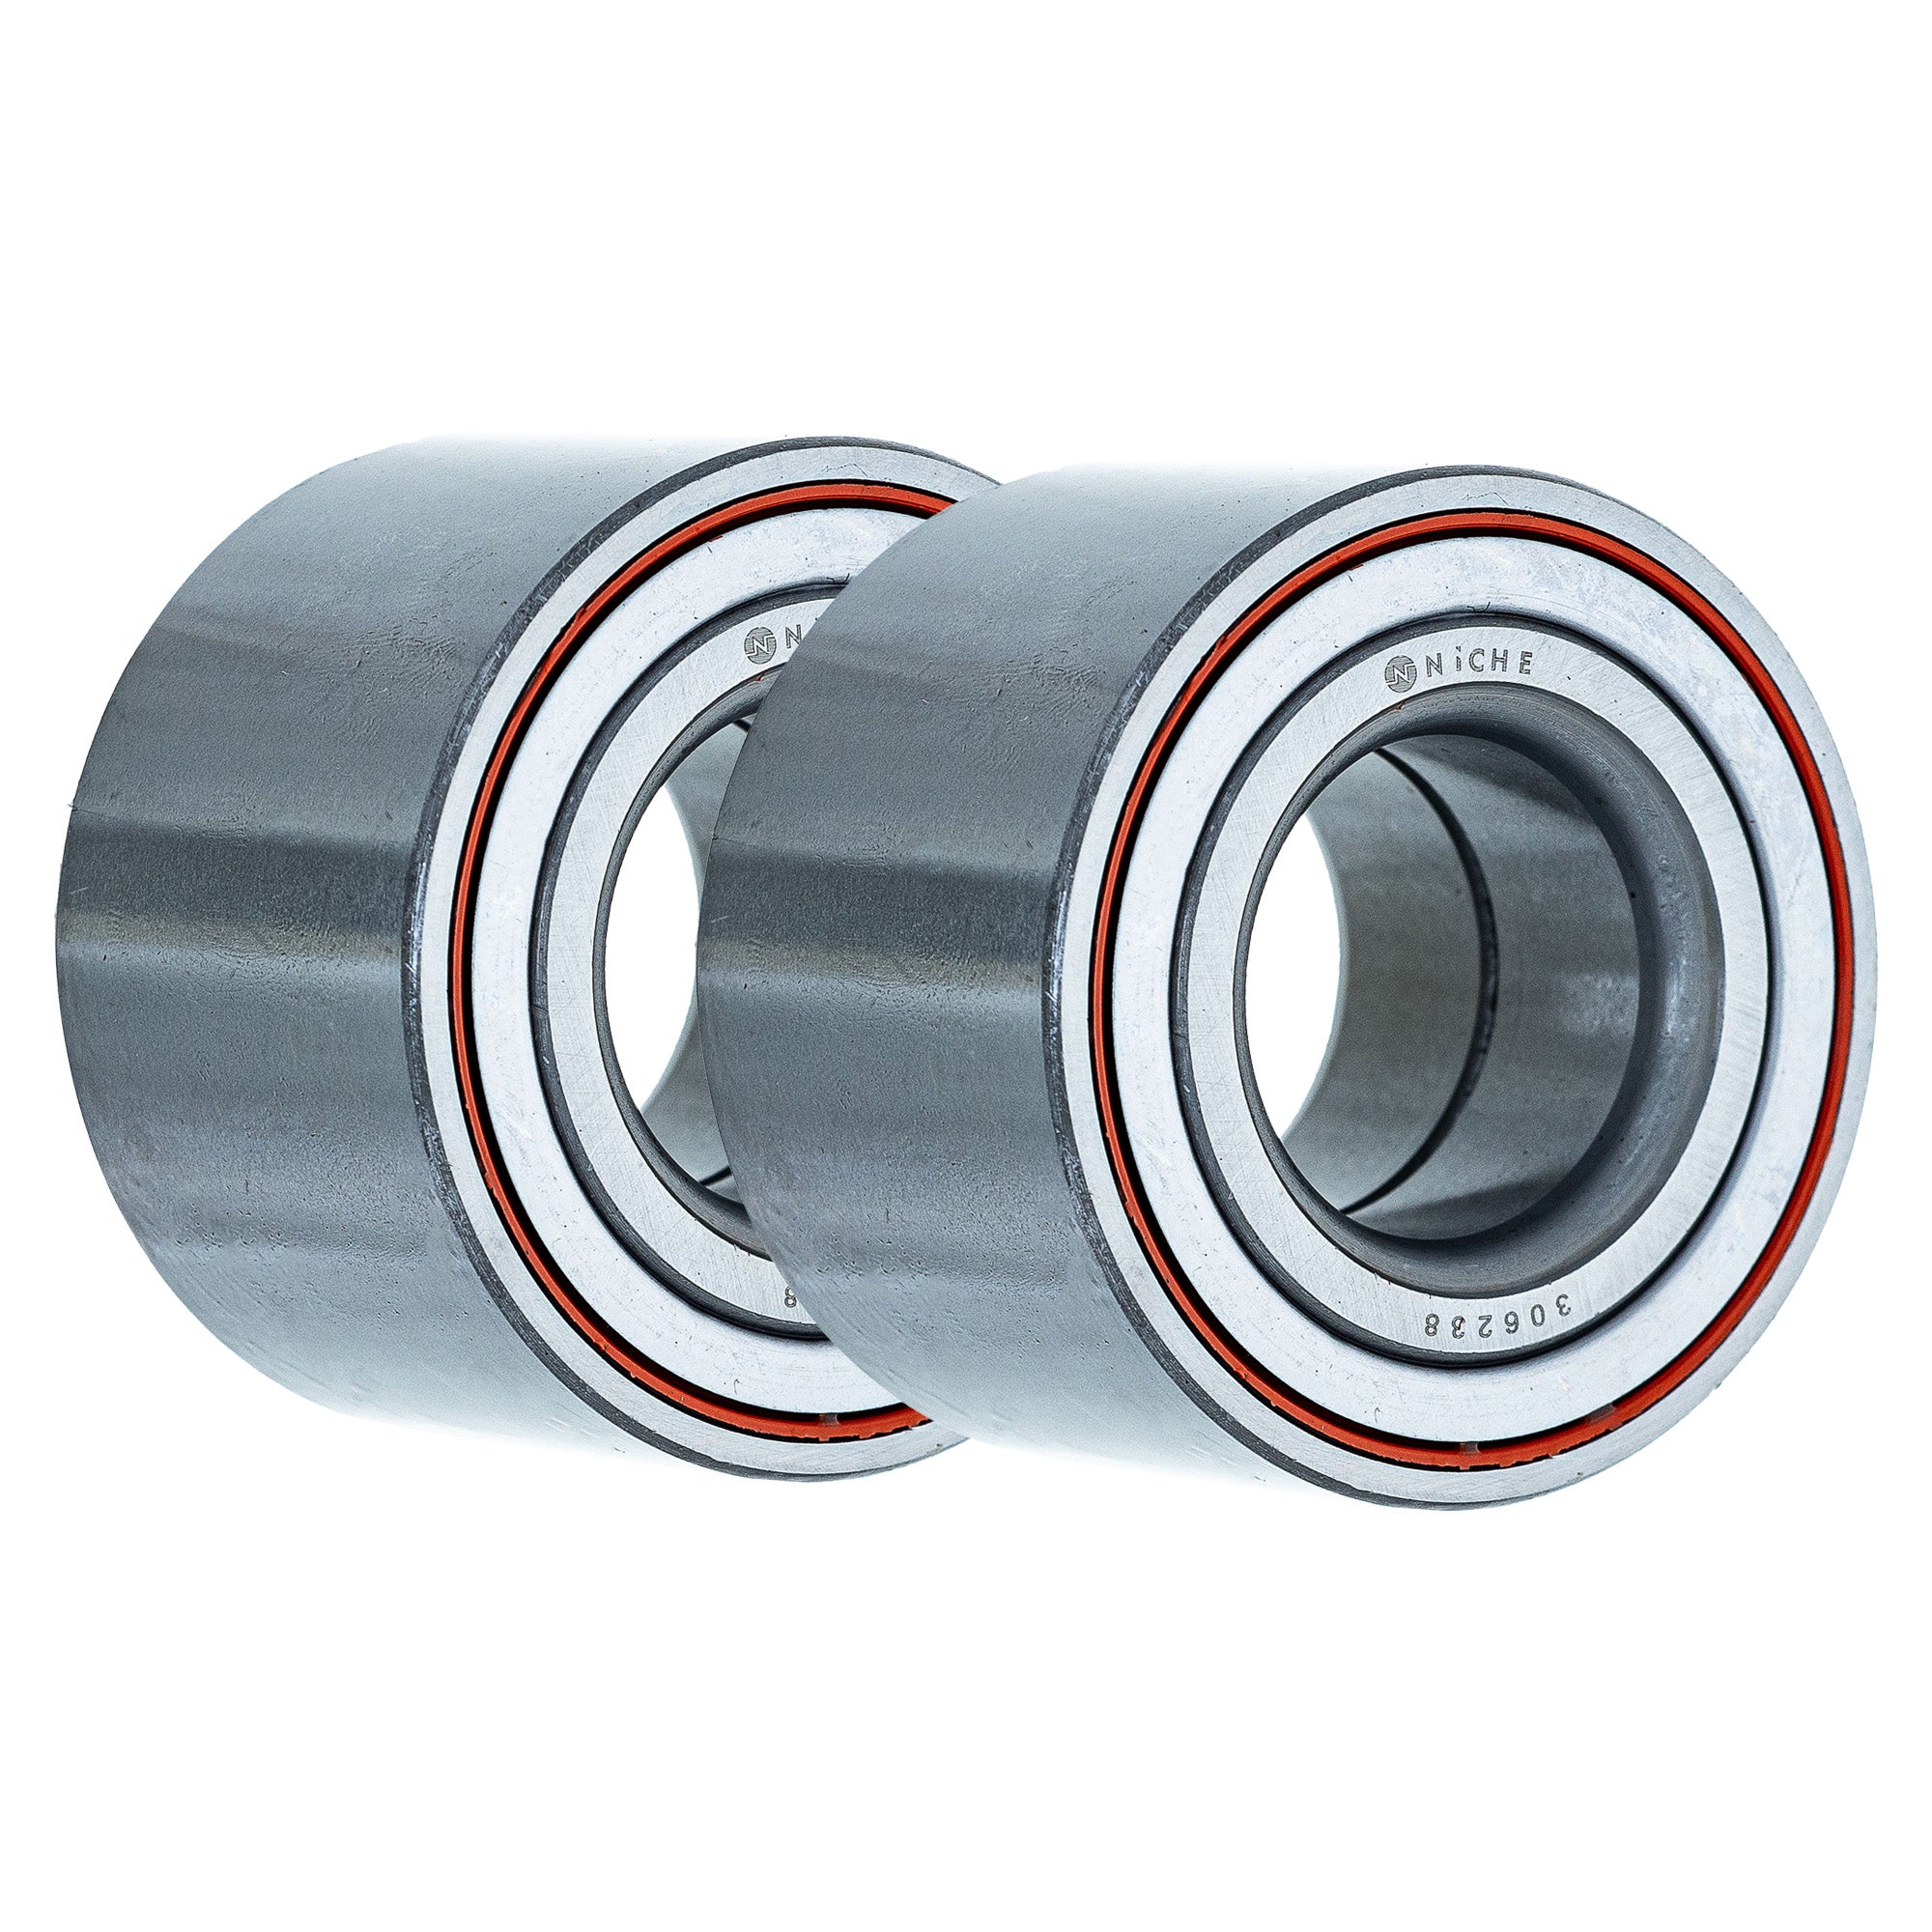 Double Row, Angular Contact, Ball Bearing Pack of 2 2-Pack for zOTHER Traxter Spyder NICHE 519-CBB2203R